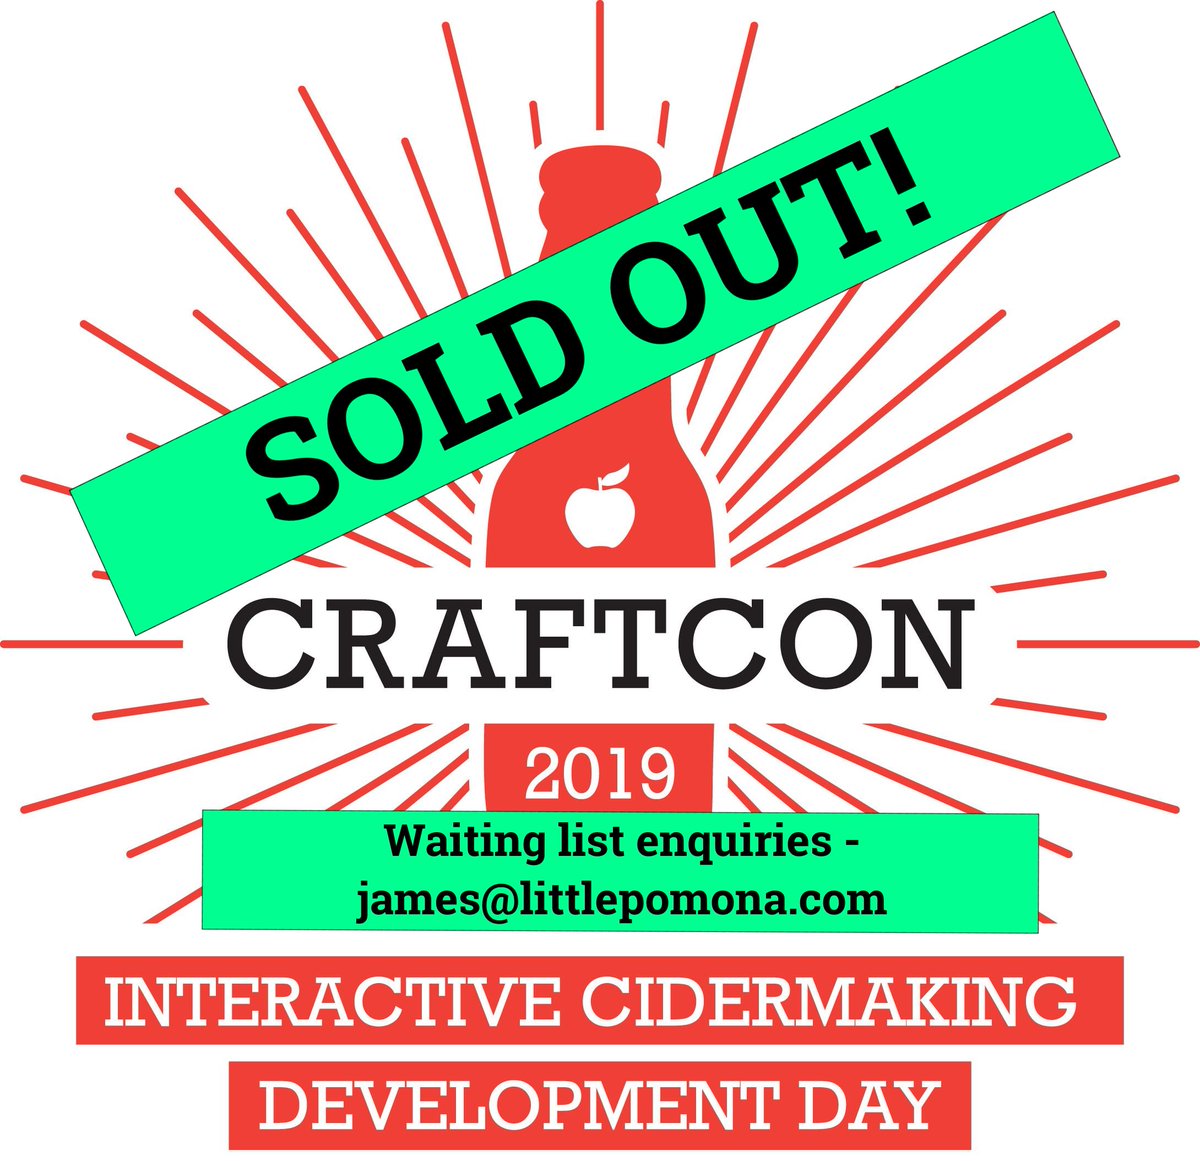 SOLD OUT - #CraftCon2019 has sold out. Our full allocation of tickets have been claimed, although there are some on-site overnight accommodation still available via the ticket page: bit.ly/CraftCon2019 - this event is going to be a landmark for UK Cider. See you all soon!